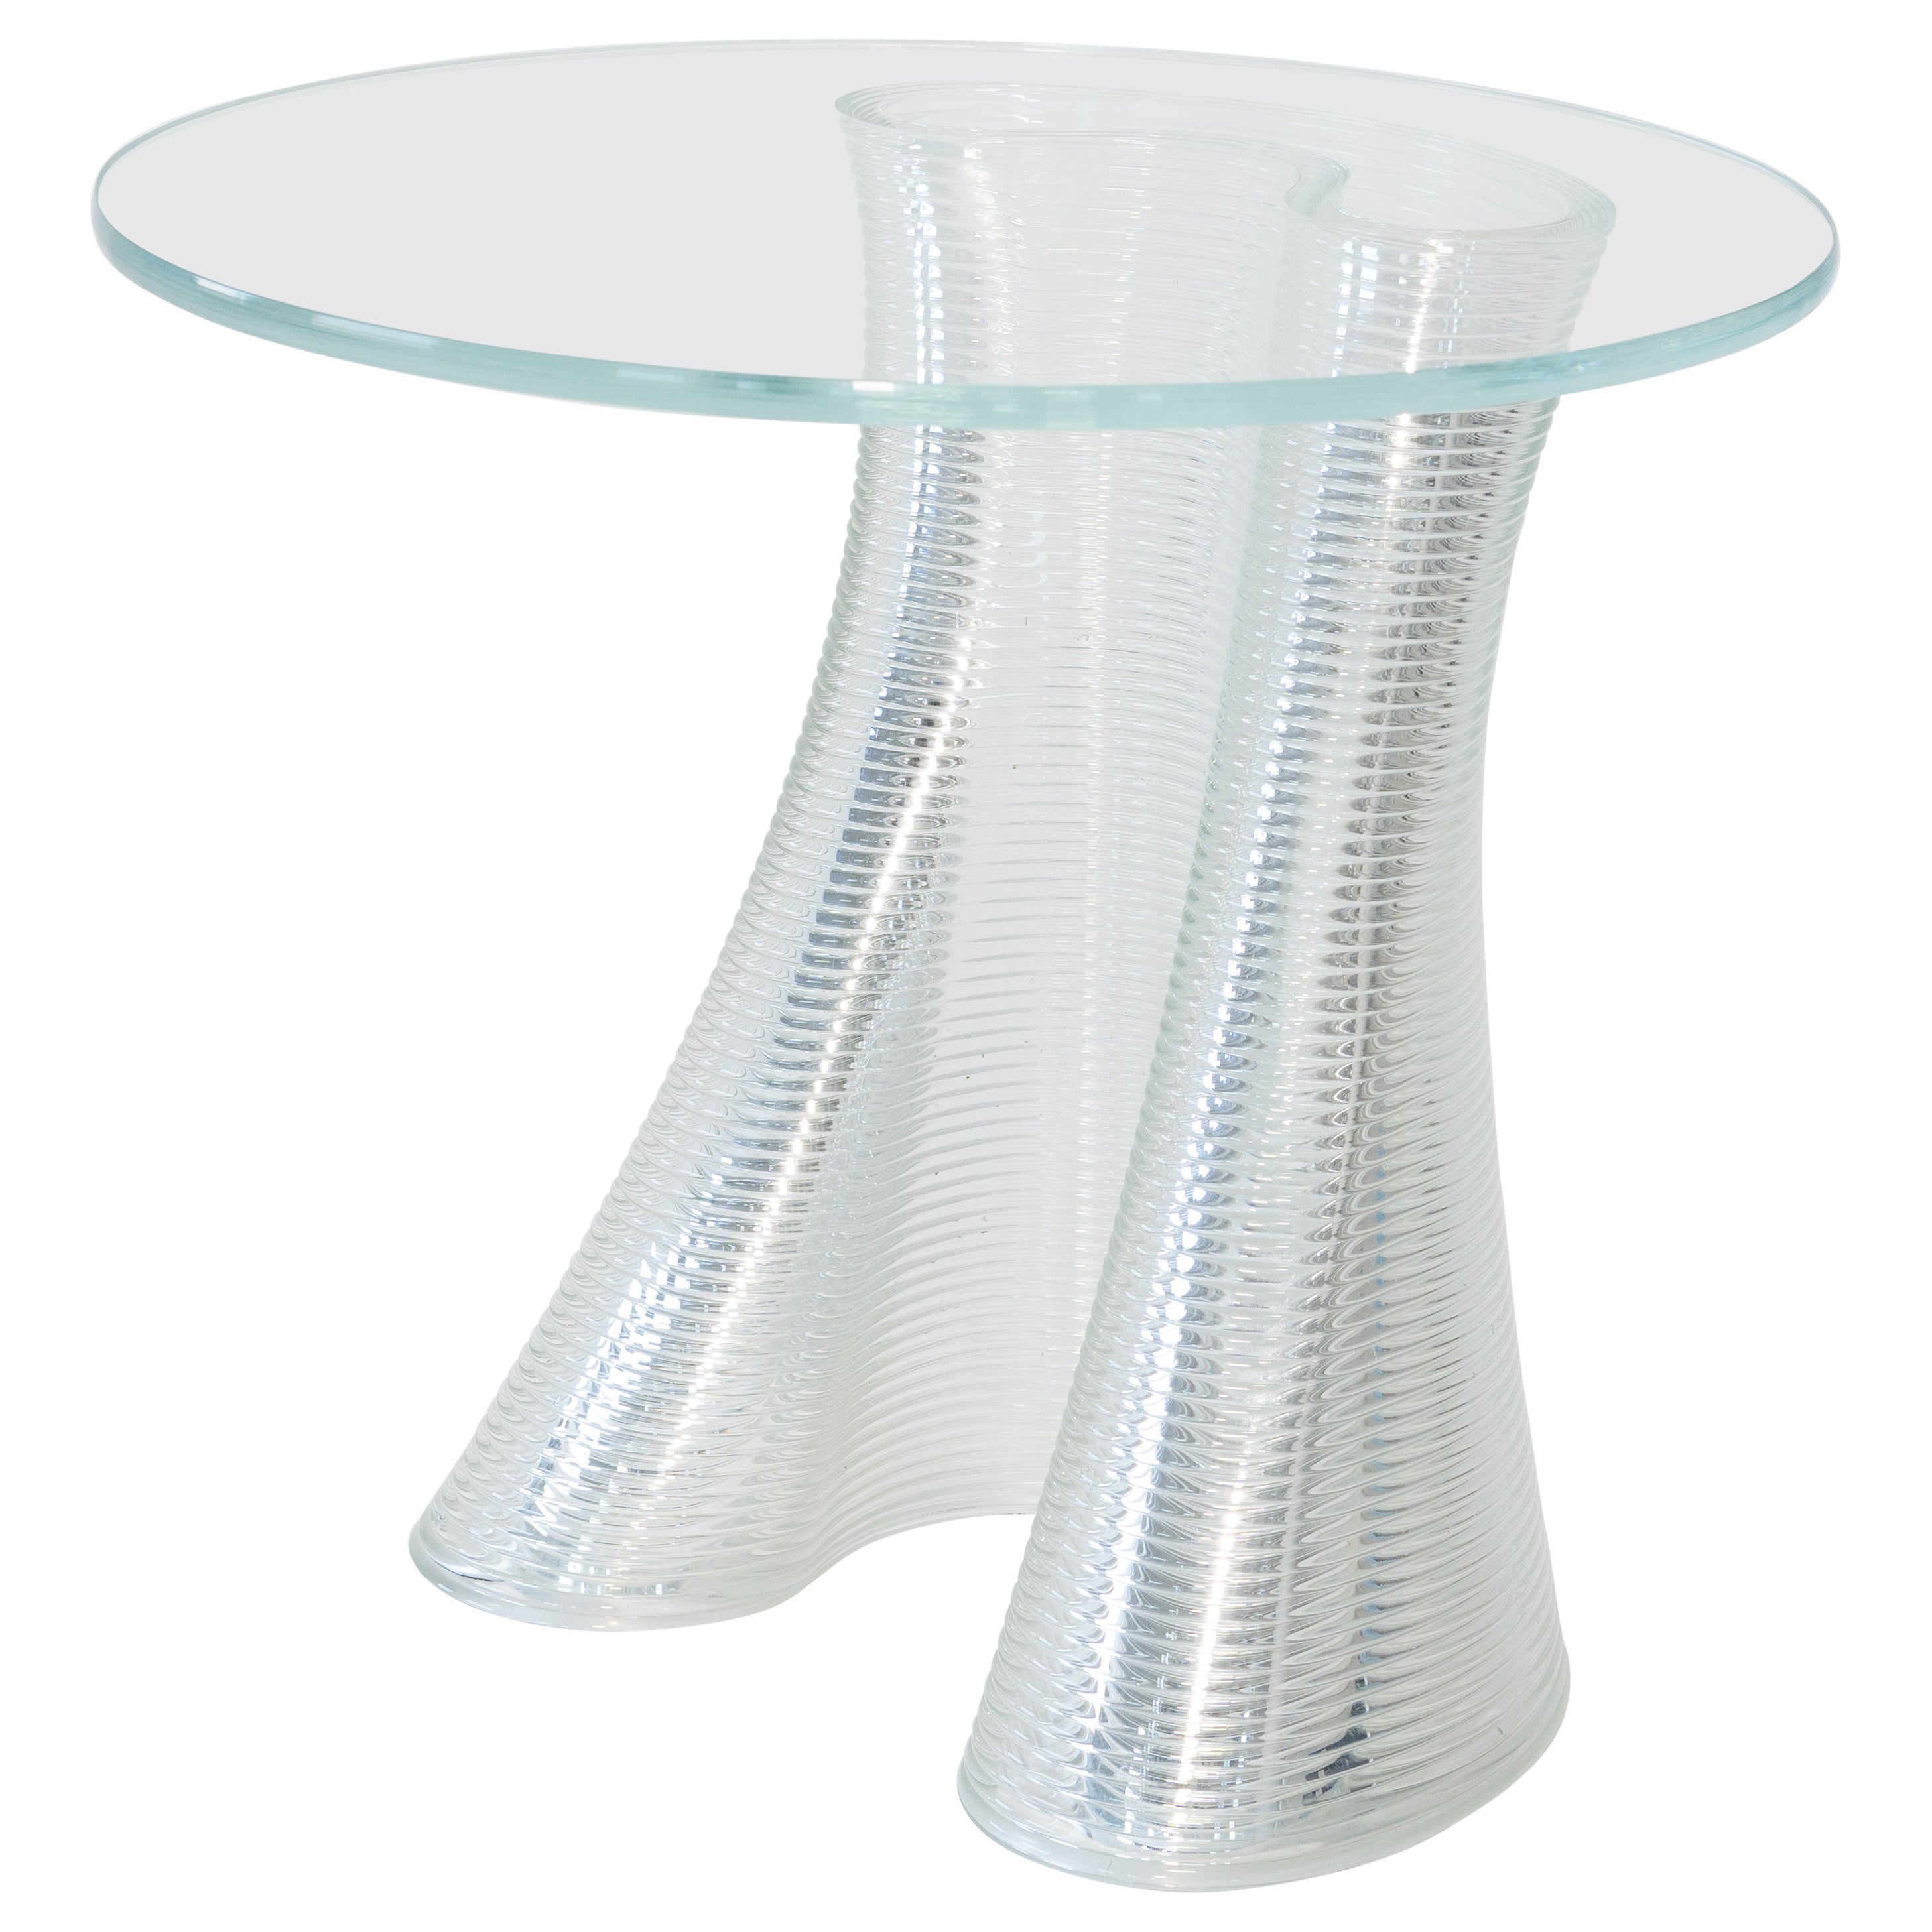 Made using Evenline's one-of-a-kind molten glass 3D printer, Drape is a low side table perfect for living next to your favorite lounge chair or couch. Inspired by the draping form of a fine hanging fabric, there is a surreal nature such a soft form